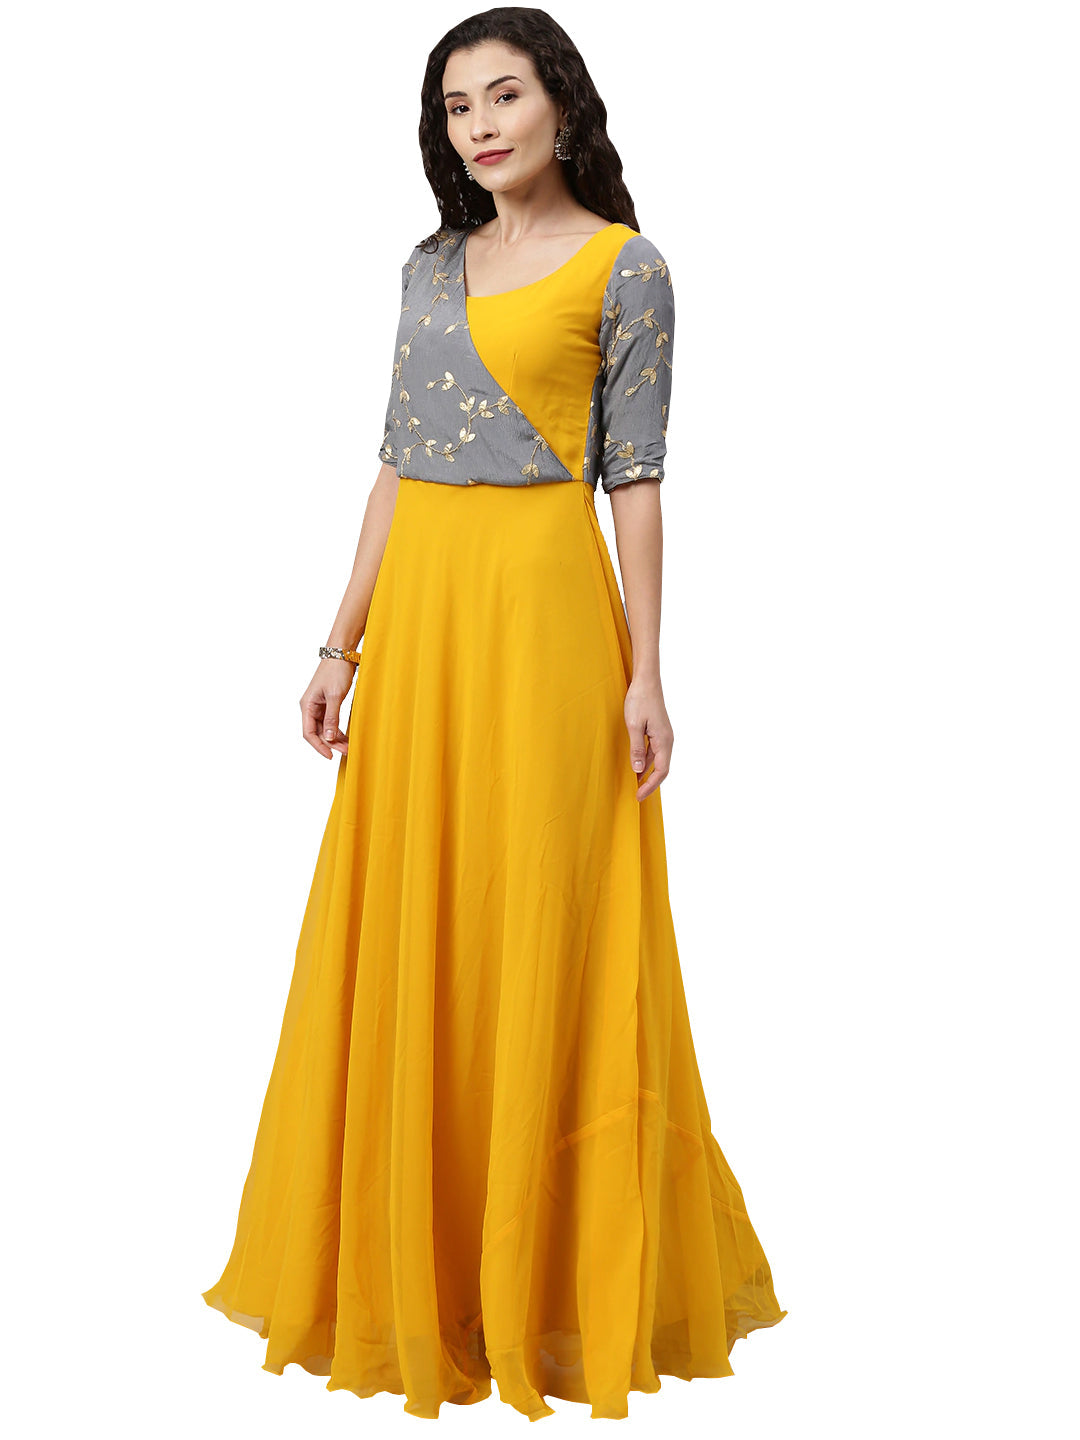 Grey-&-Yellow-Overlapping-Style-Gown